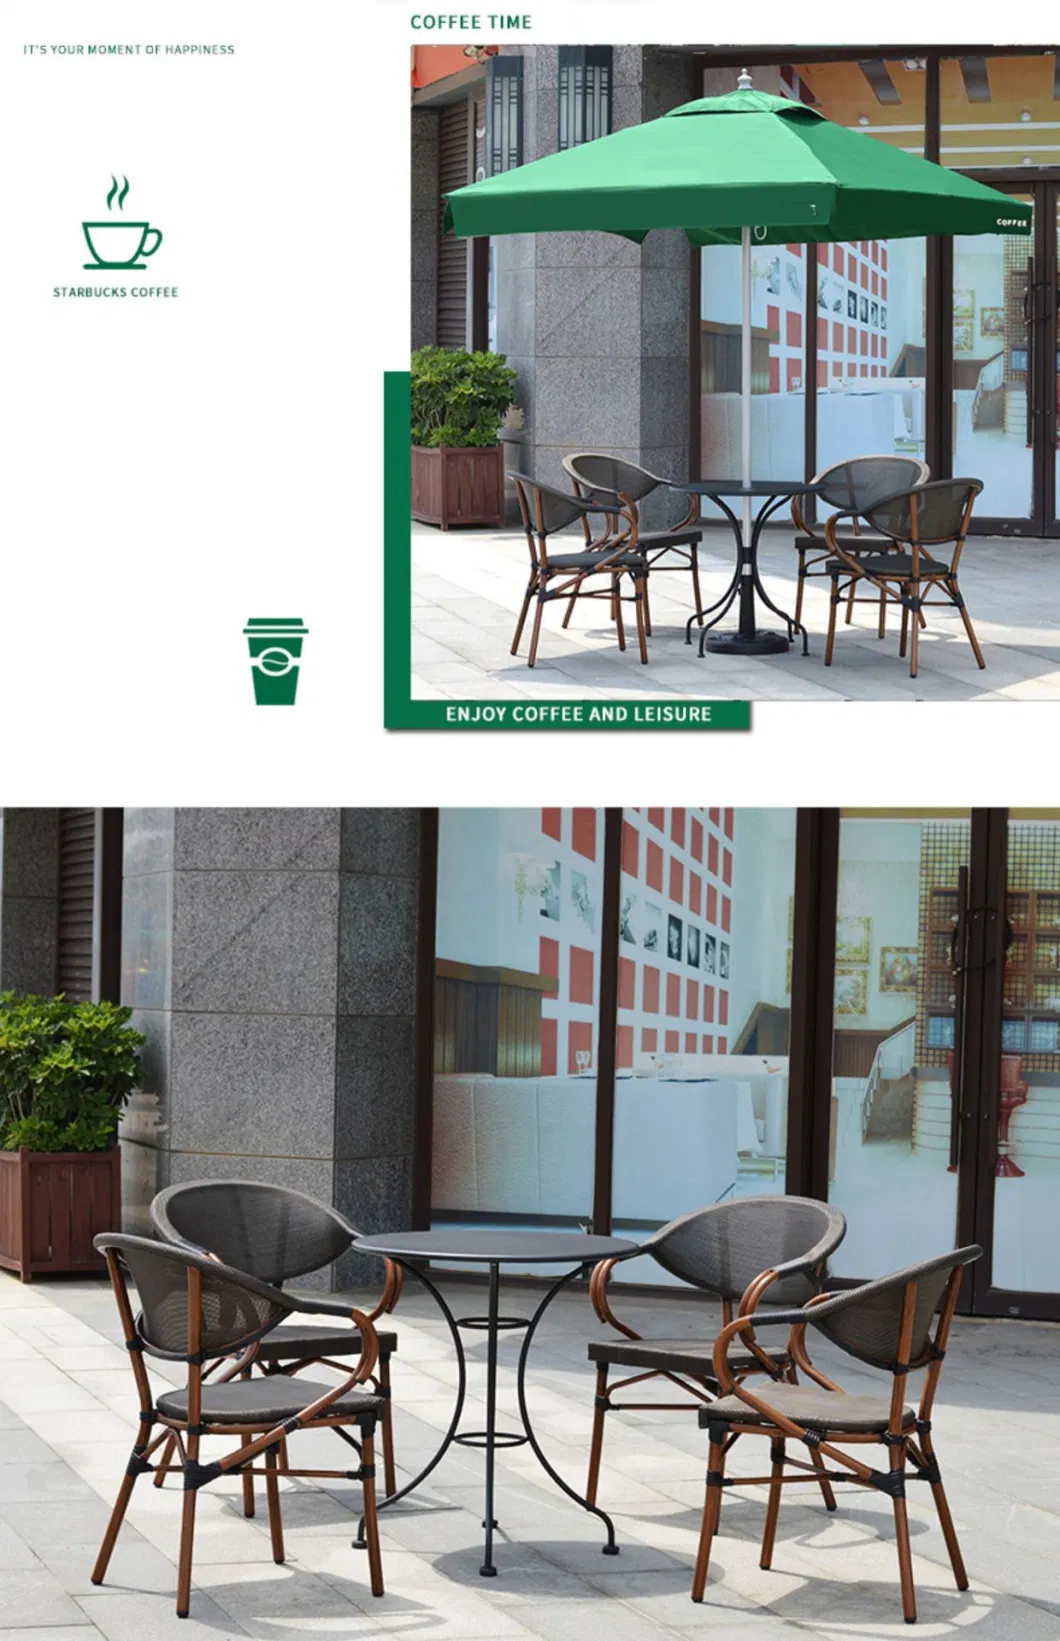 Outdoor Table and Chair Combination Cafe Balcony Table and Chair Aluminum Alloy Leisure Rattan Chair Milk Tea Shop Outdoor Rattan Chair